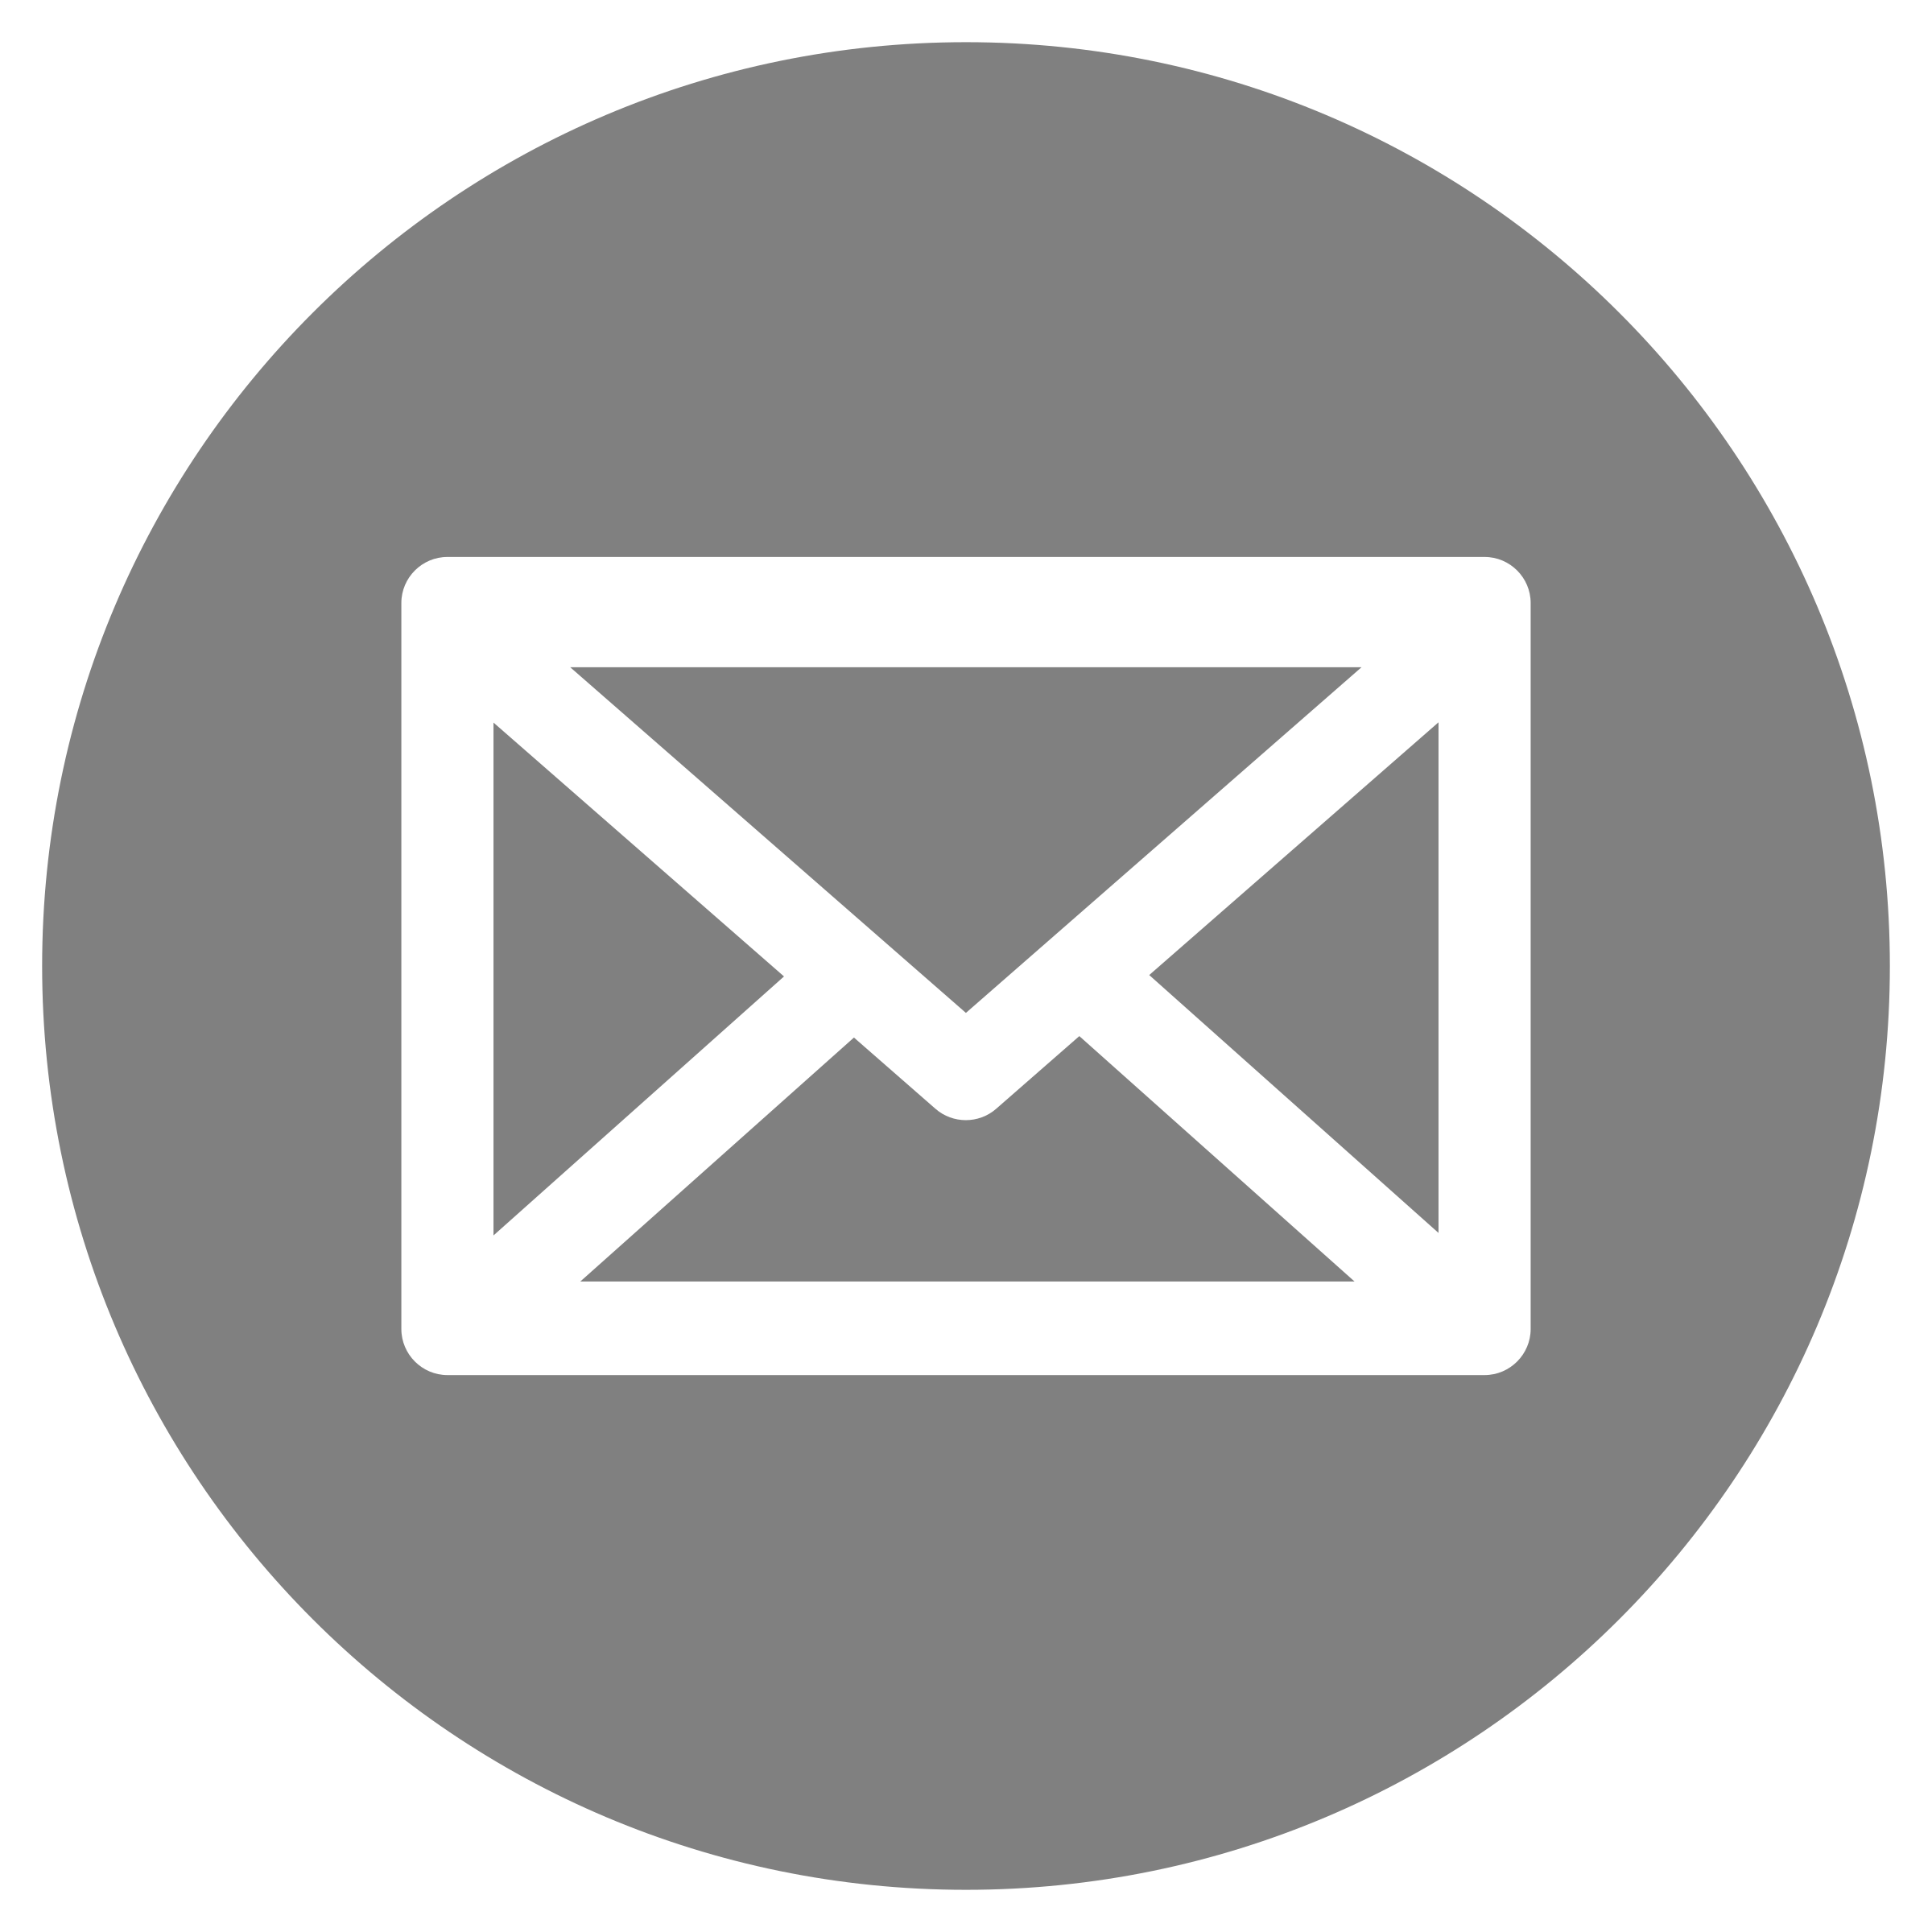 Email sign clipart - Clipground